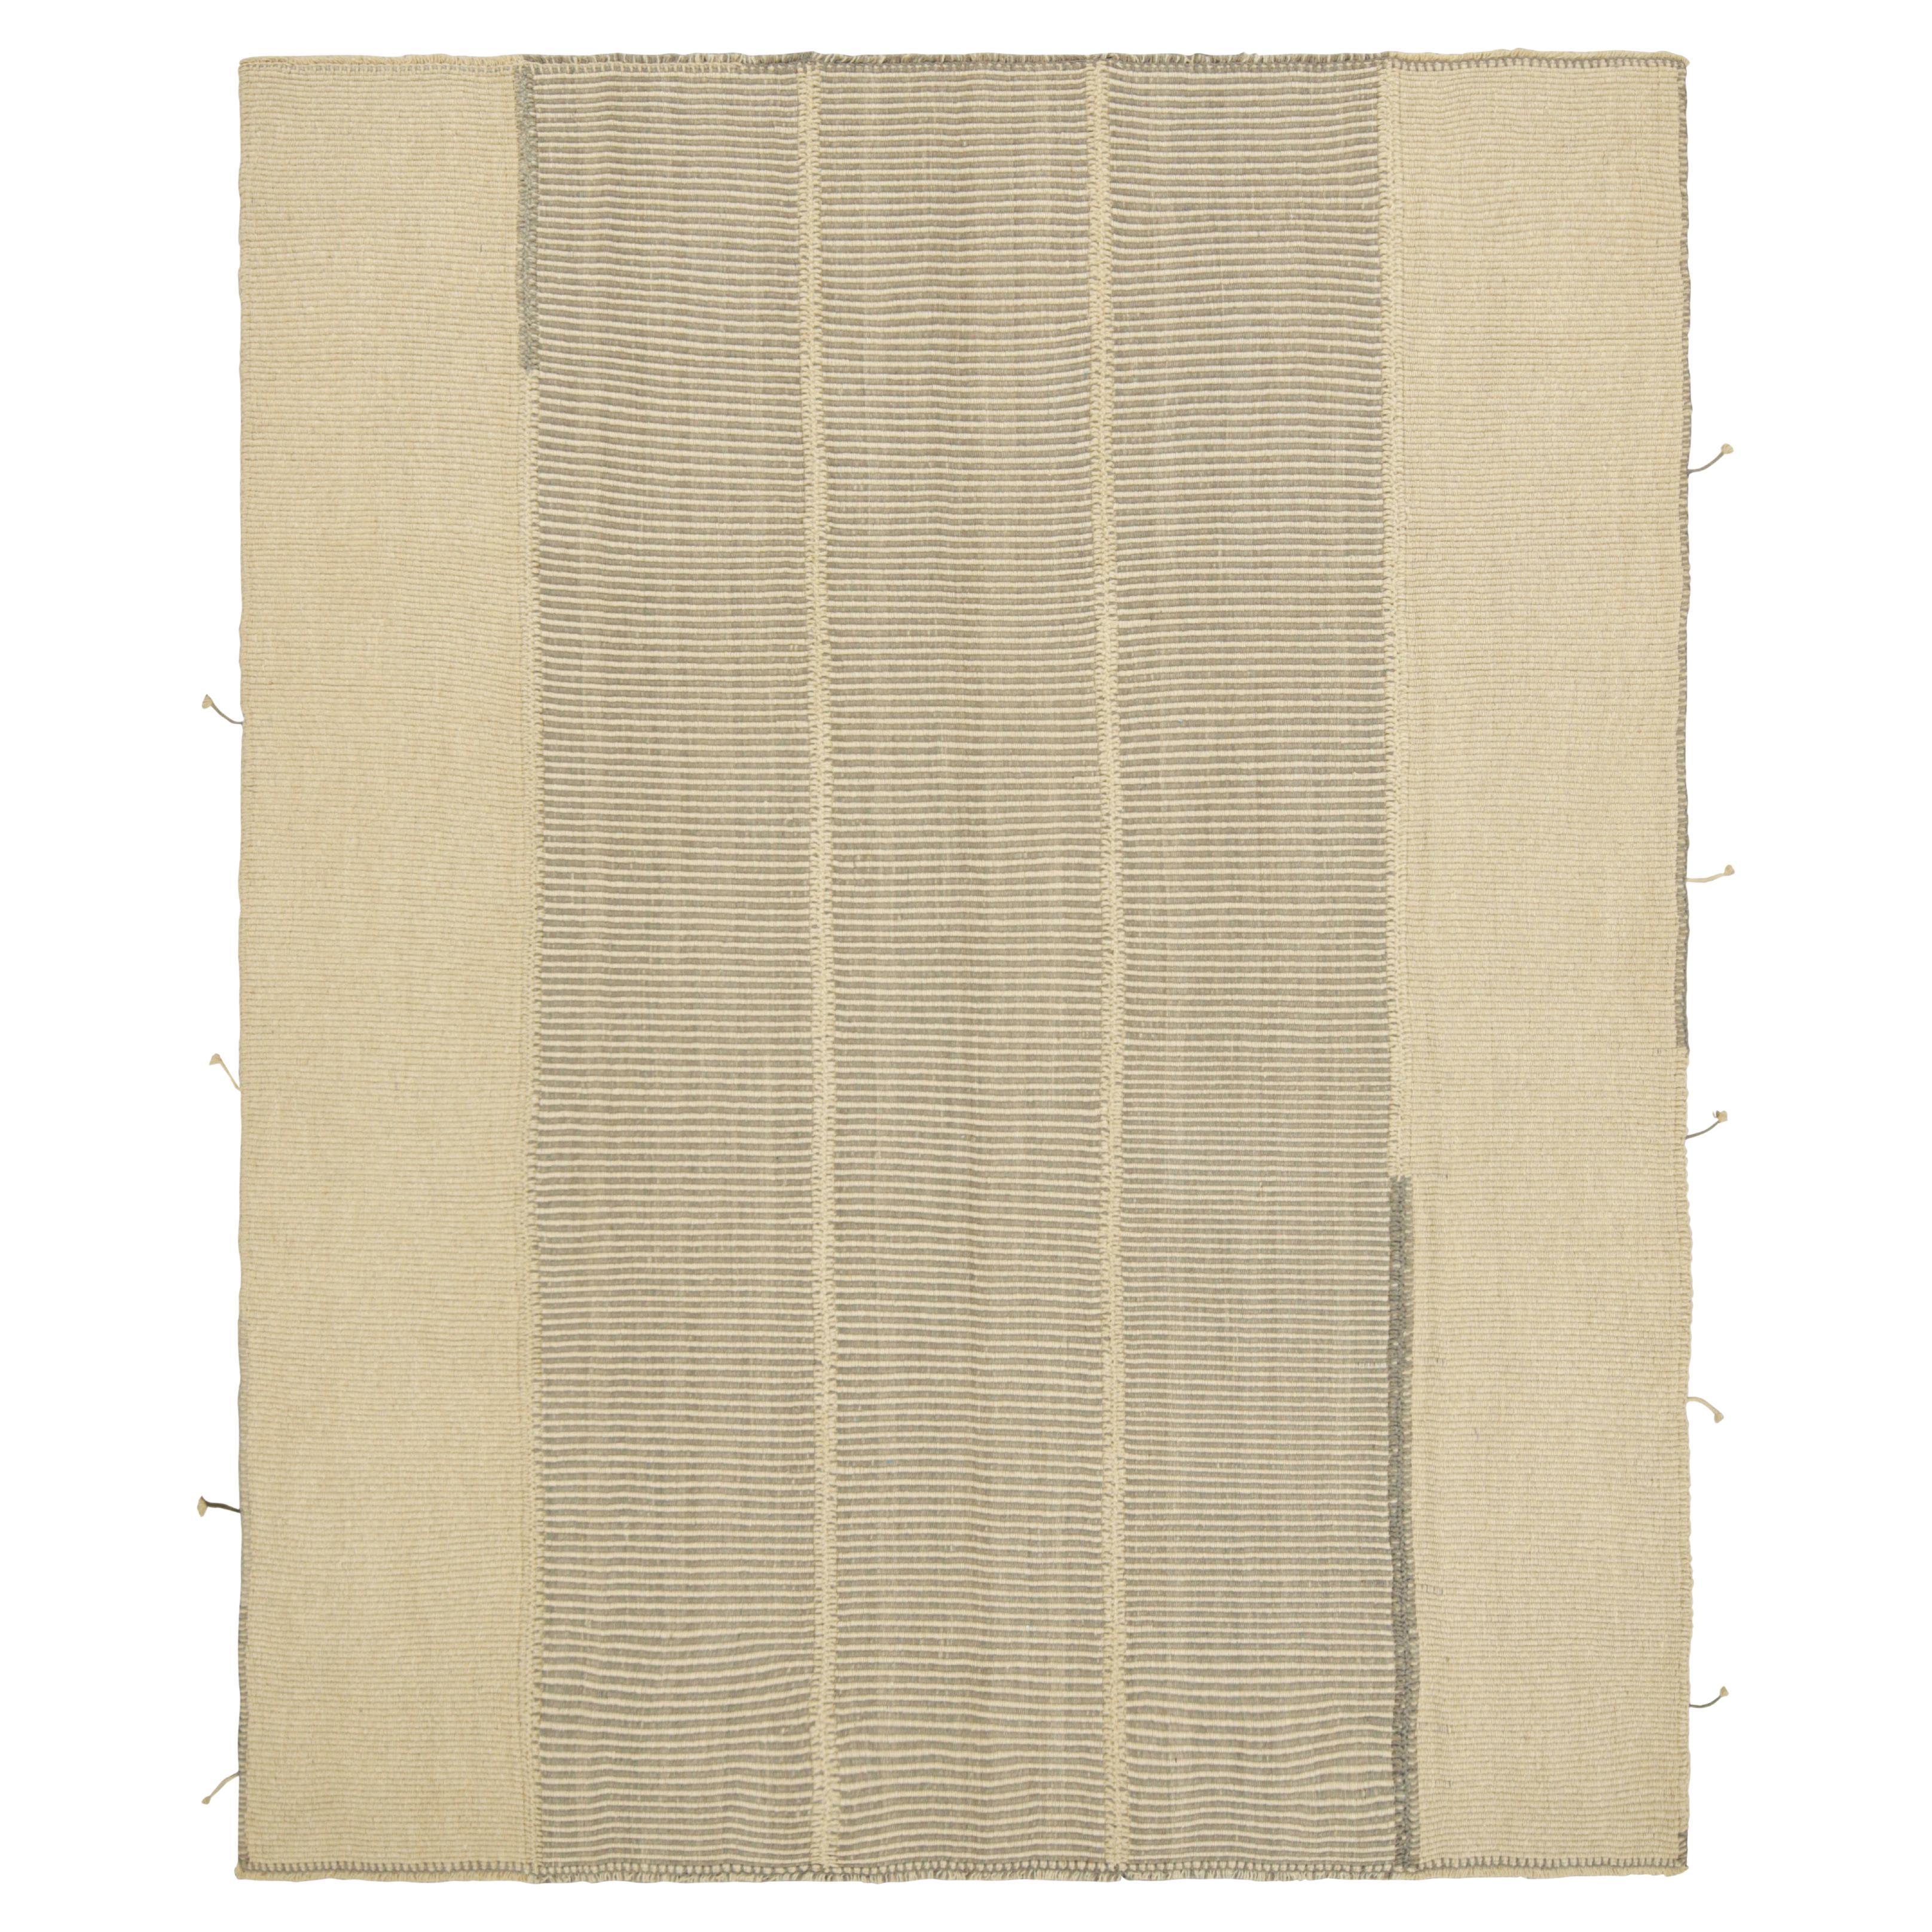 Rug & Kilim’s Contemporary Kilim in Cream White and Gray Textural Stripes For Sale